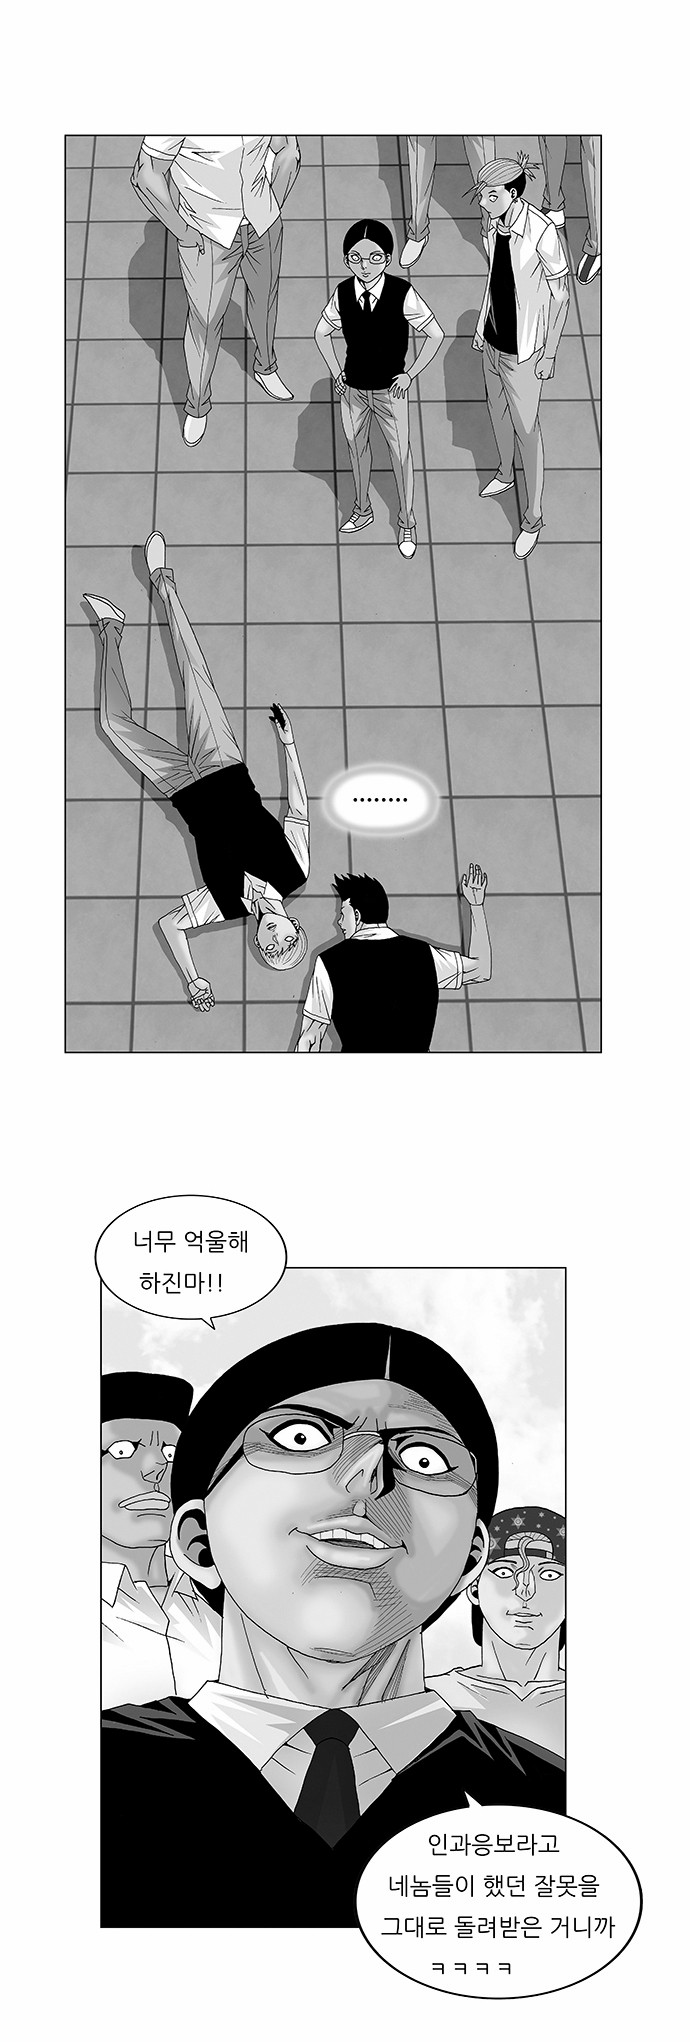 Ultimate Legend - Kang Hae Hyo - Chapter 114 - Page 1